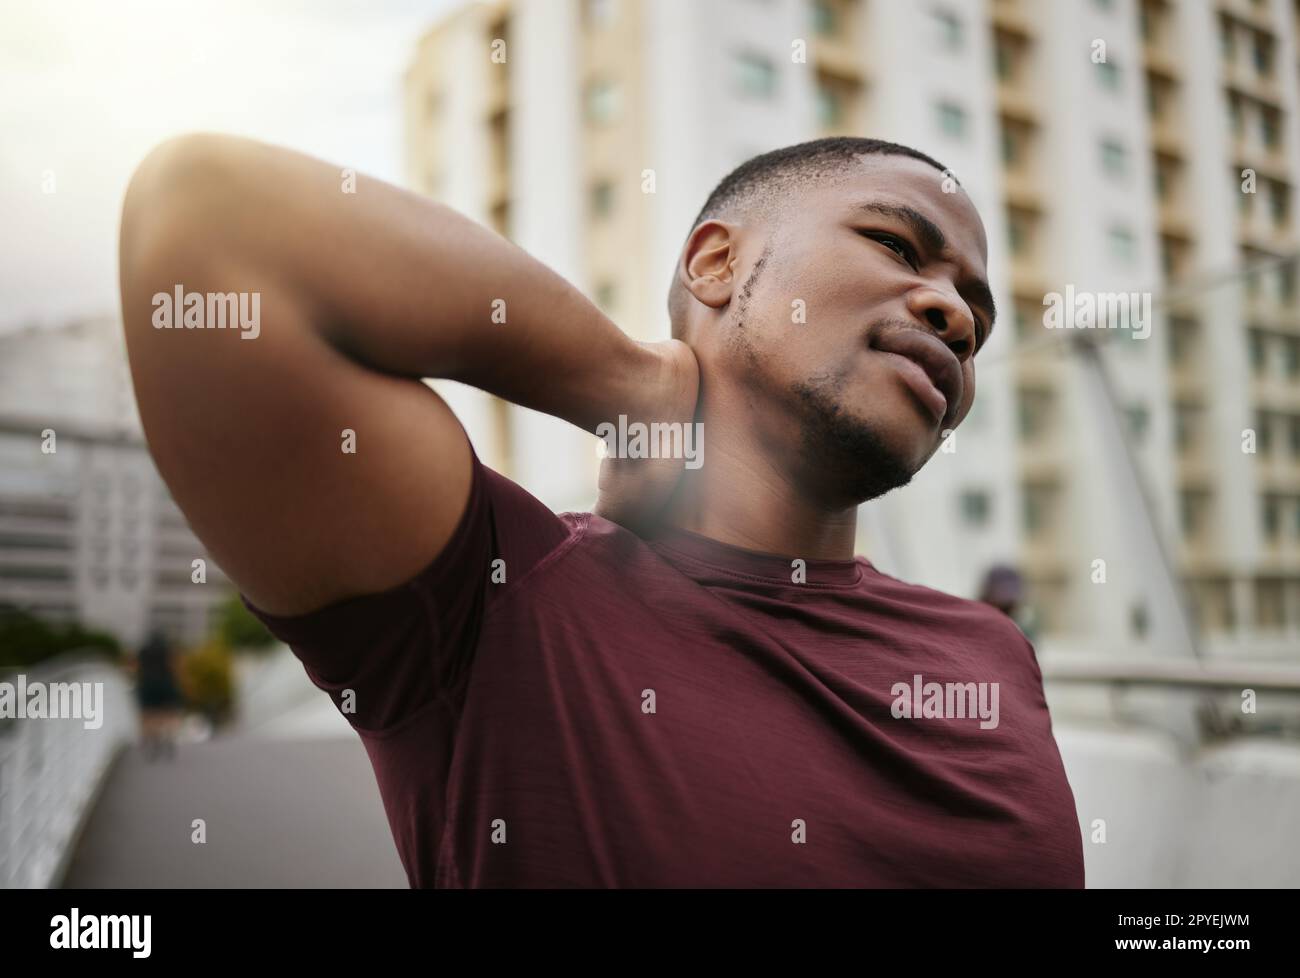 Black man, fitness or neck pain in city workout, training or exercise is muscle burnout, tension stress or body crisis. Runner, sports athlete or personal trainer with injury or running marathon risk Stock Photo